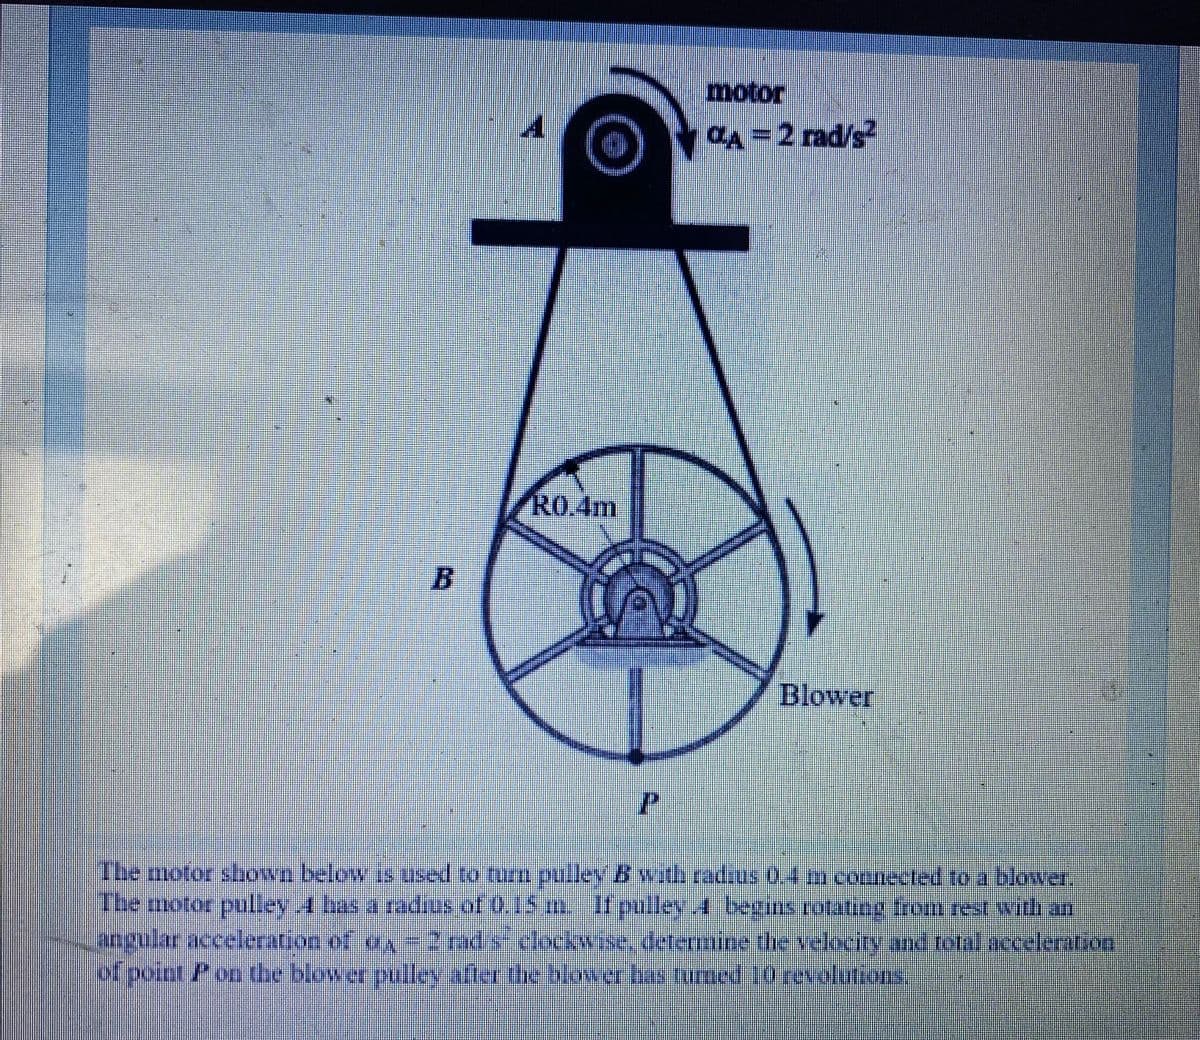 motor
CA =2 rad/s
R0.4m
Blower
The motor shown below is used to turm pulley B wath radzus 0.4 m connected to a blower,
Ibe motor pullev 4 bas a adius of 0.15 mIt pulleyA besins rotatng trom rest withan
angular acceleration of ay -2 rad s clockwise, determine the velocity and tolalacceleration
of poinr Pon the blower pulley afler the blower bas turmed 10revolutions,
